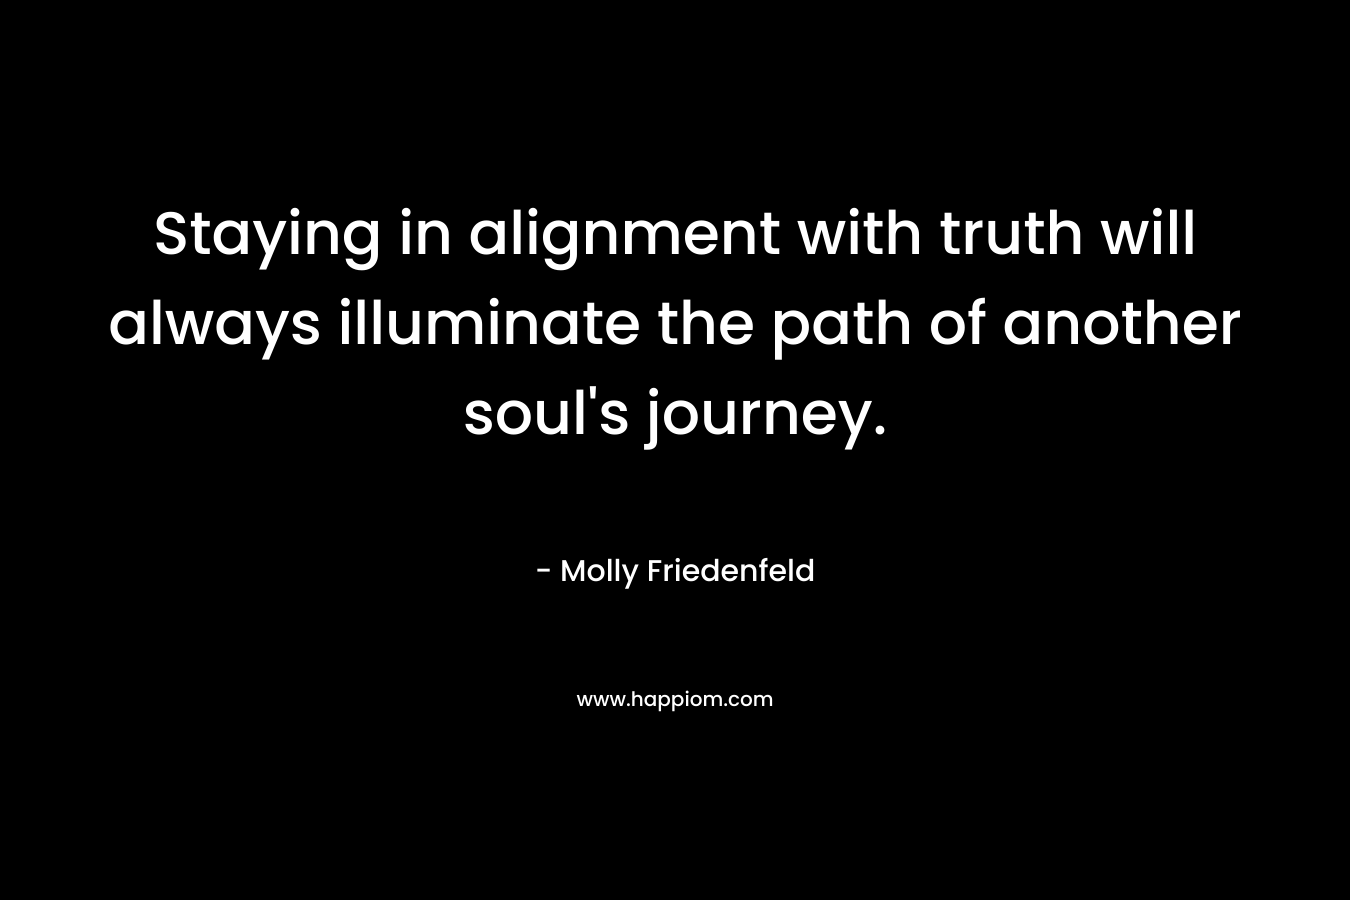 Staying in alignment with truth will always illuminate the path of another soul's journey.